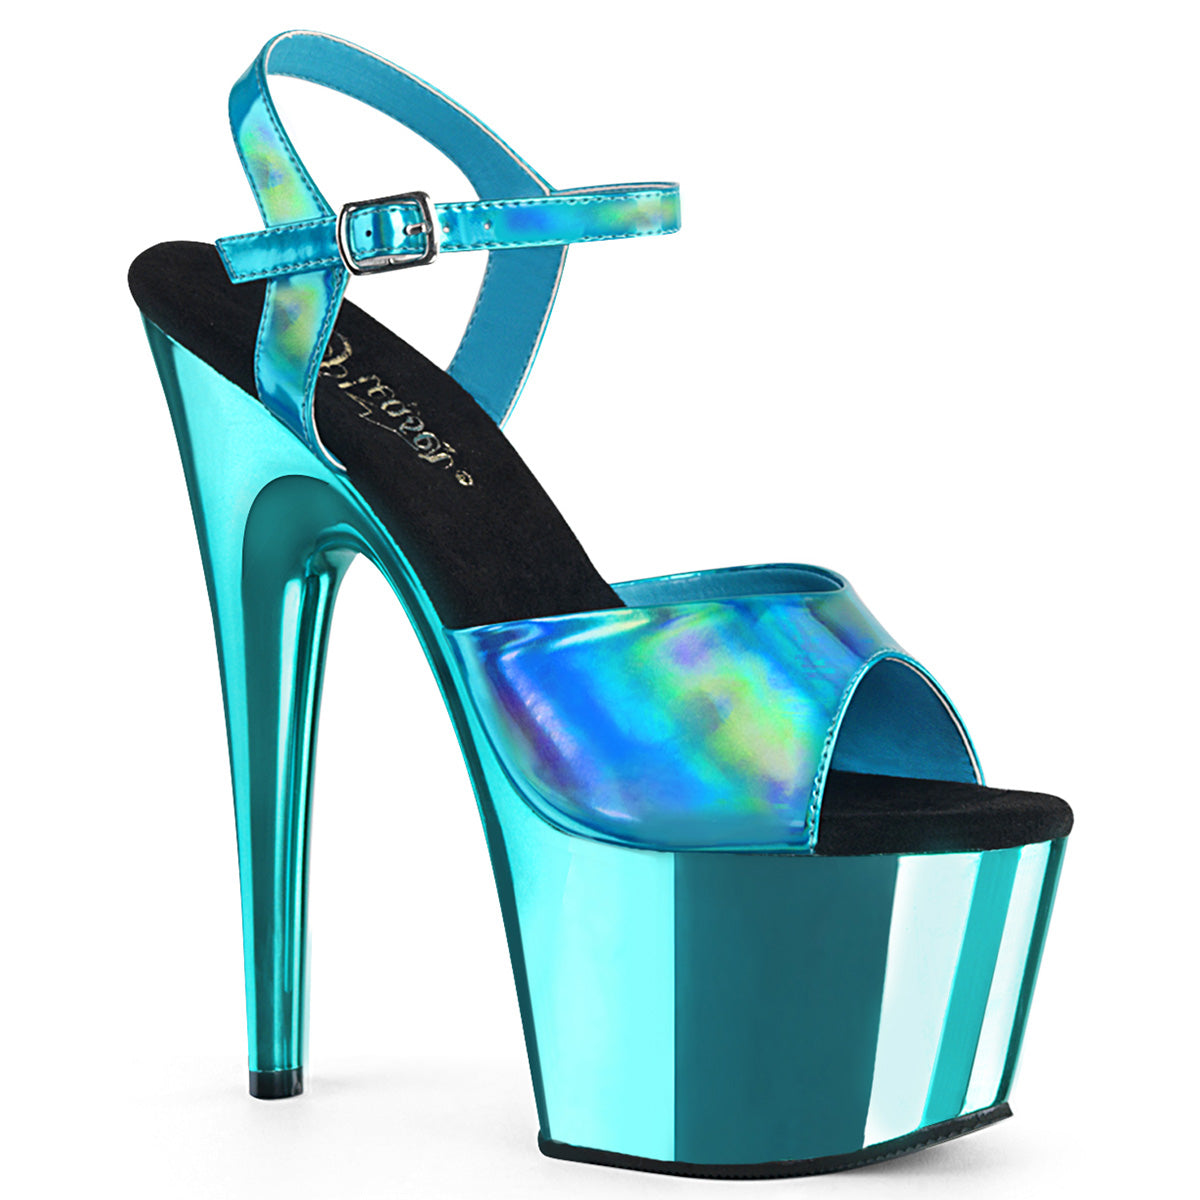 Pleaser Womens Sandals ADORE-709HGCH Turquoise Hologram/Turquoise Chrome